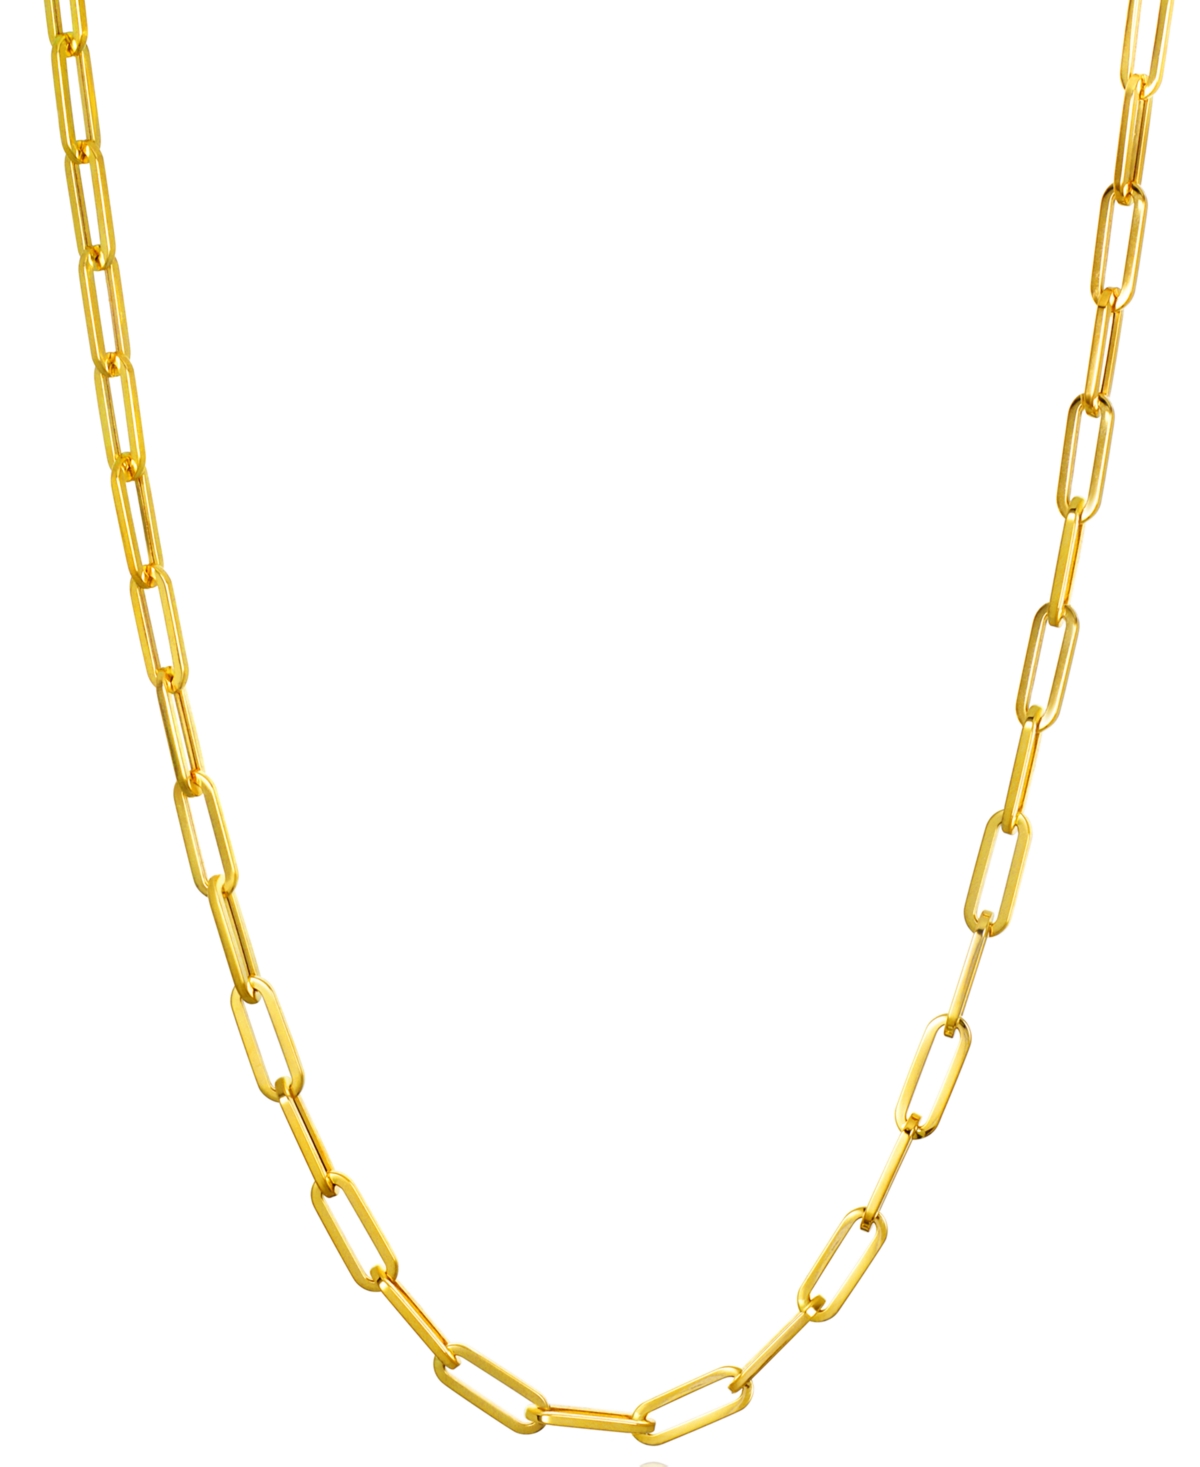 Paperclip Link 18" Chain Necklace in 14k Gold - Yellow Gold